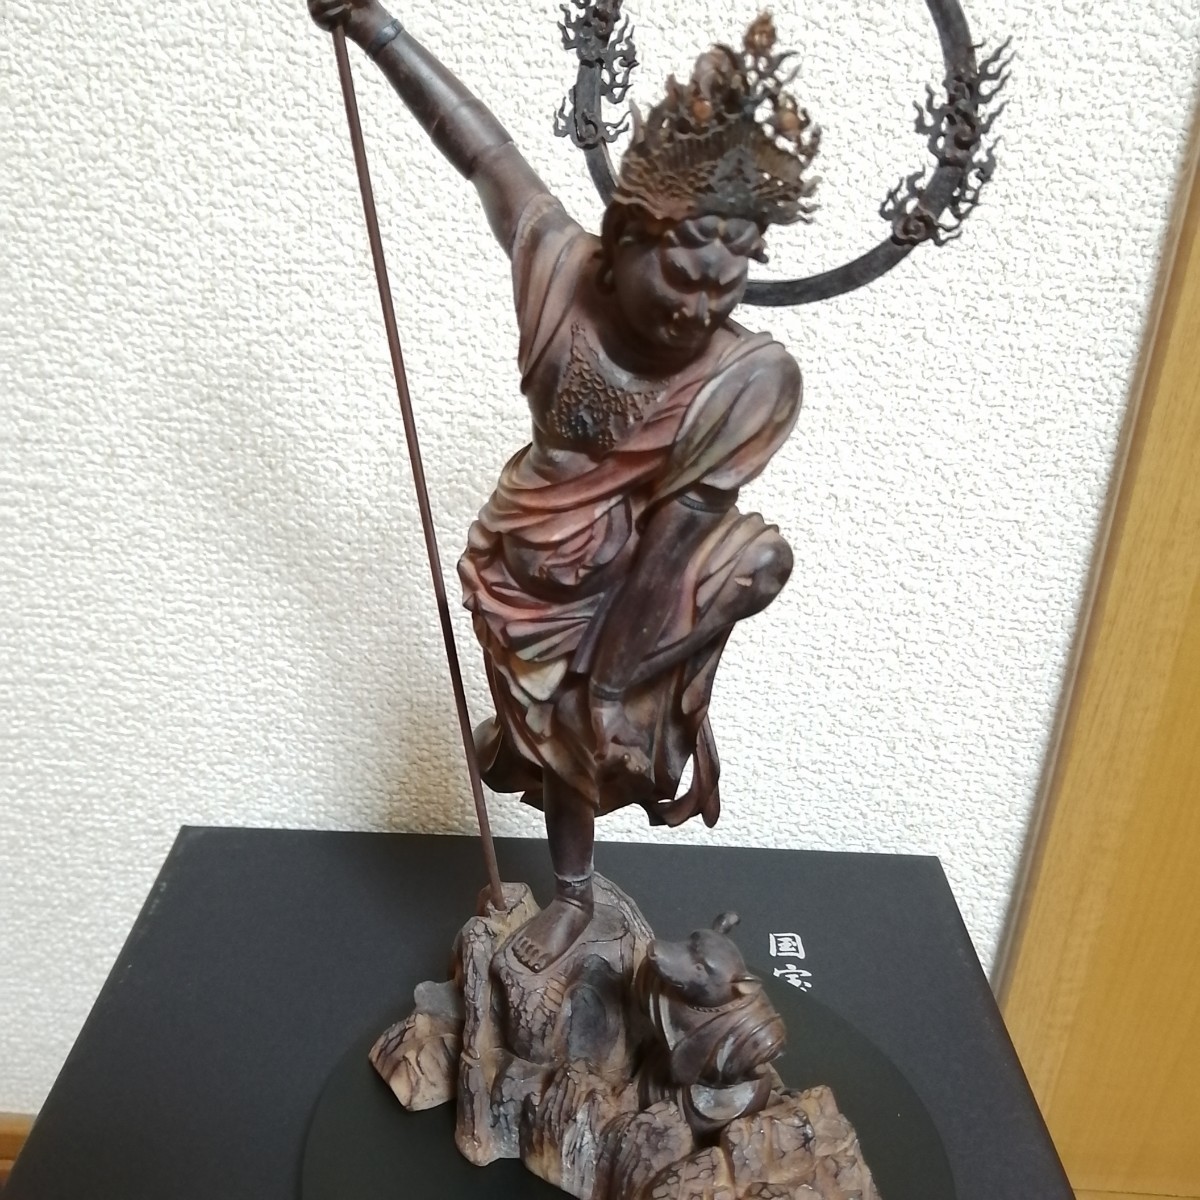  prompt decision new goods #.... Akira . image ( toilet. god sama ) appreciation for Buddhist image figure limited sale goods inspection chair m.... Akira . Buddhist image 